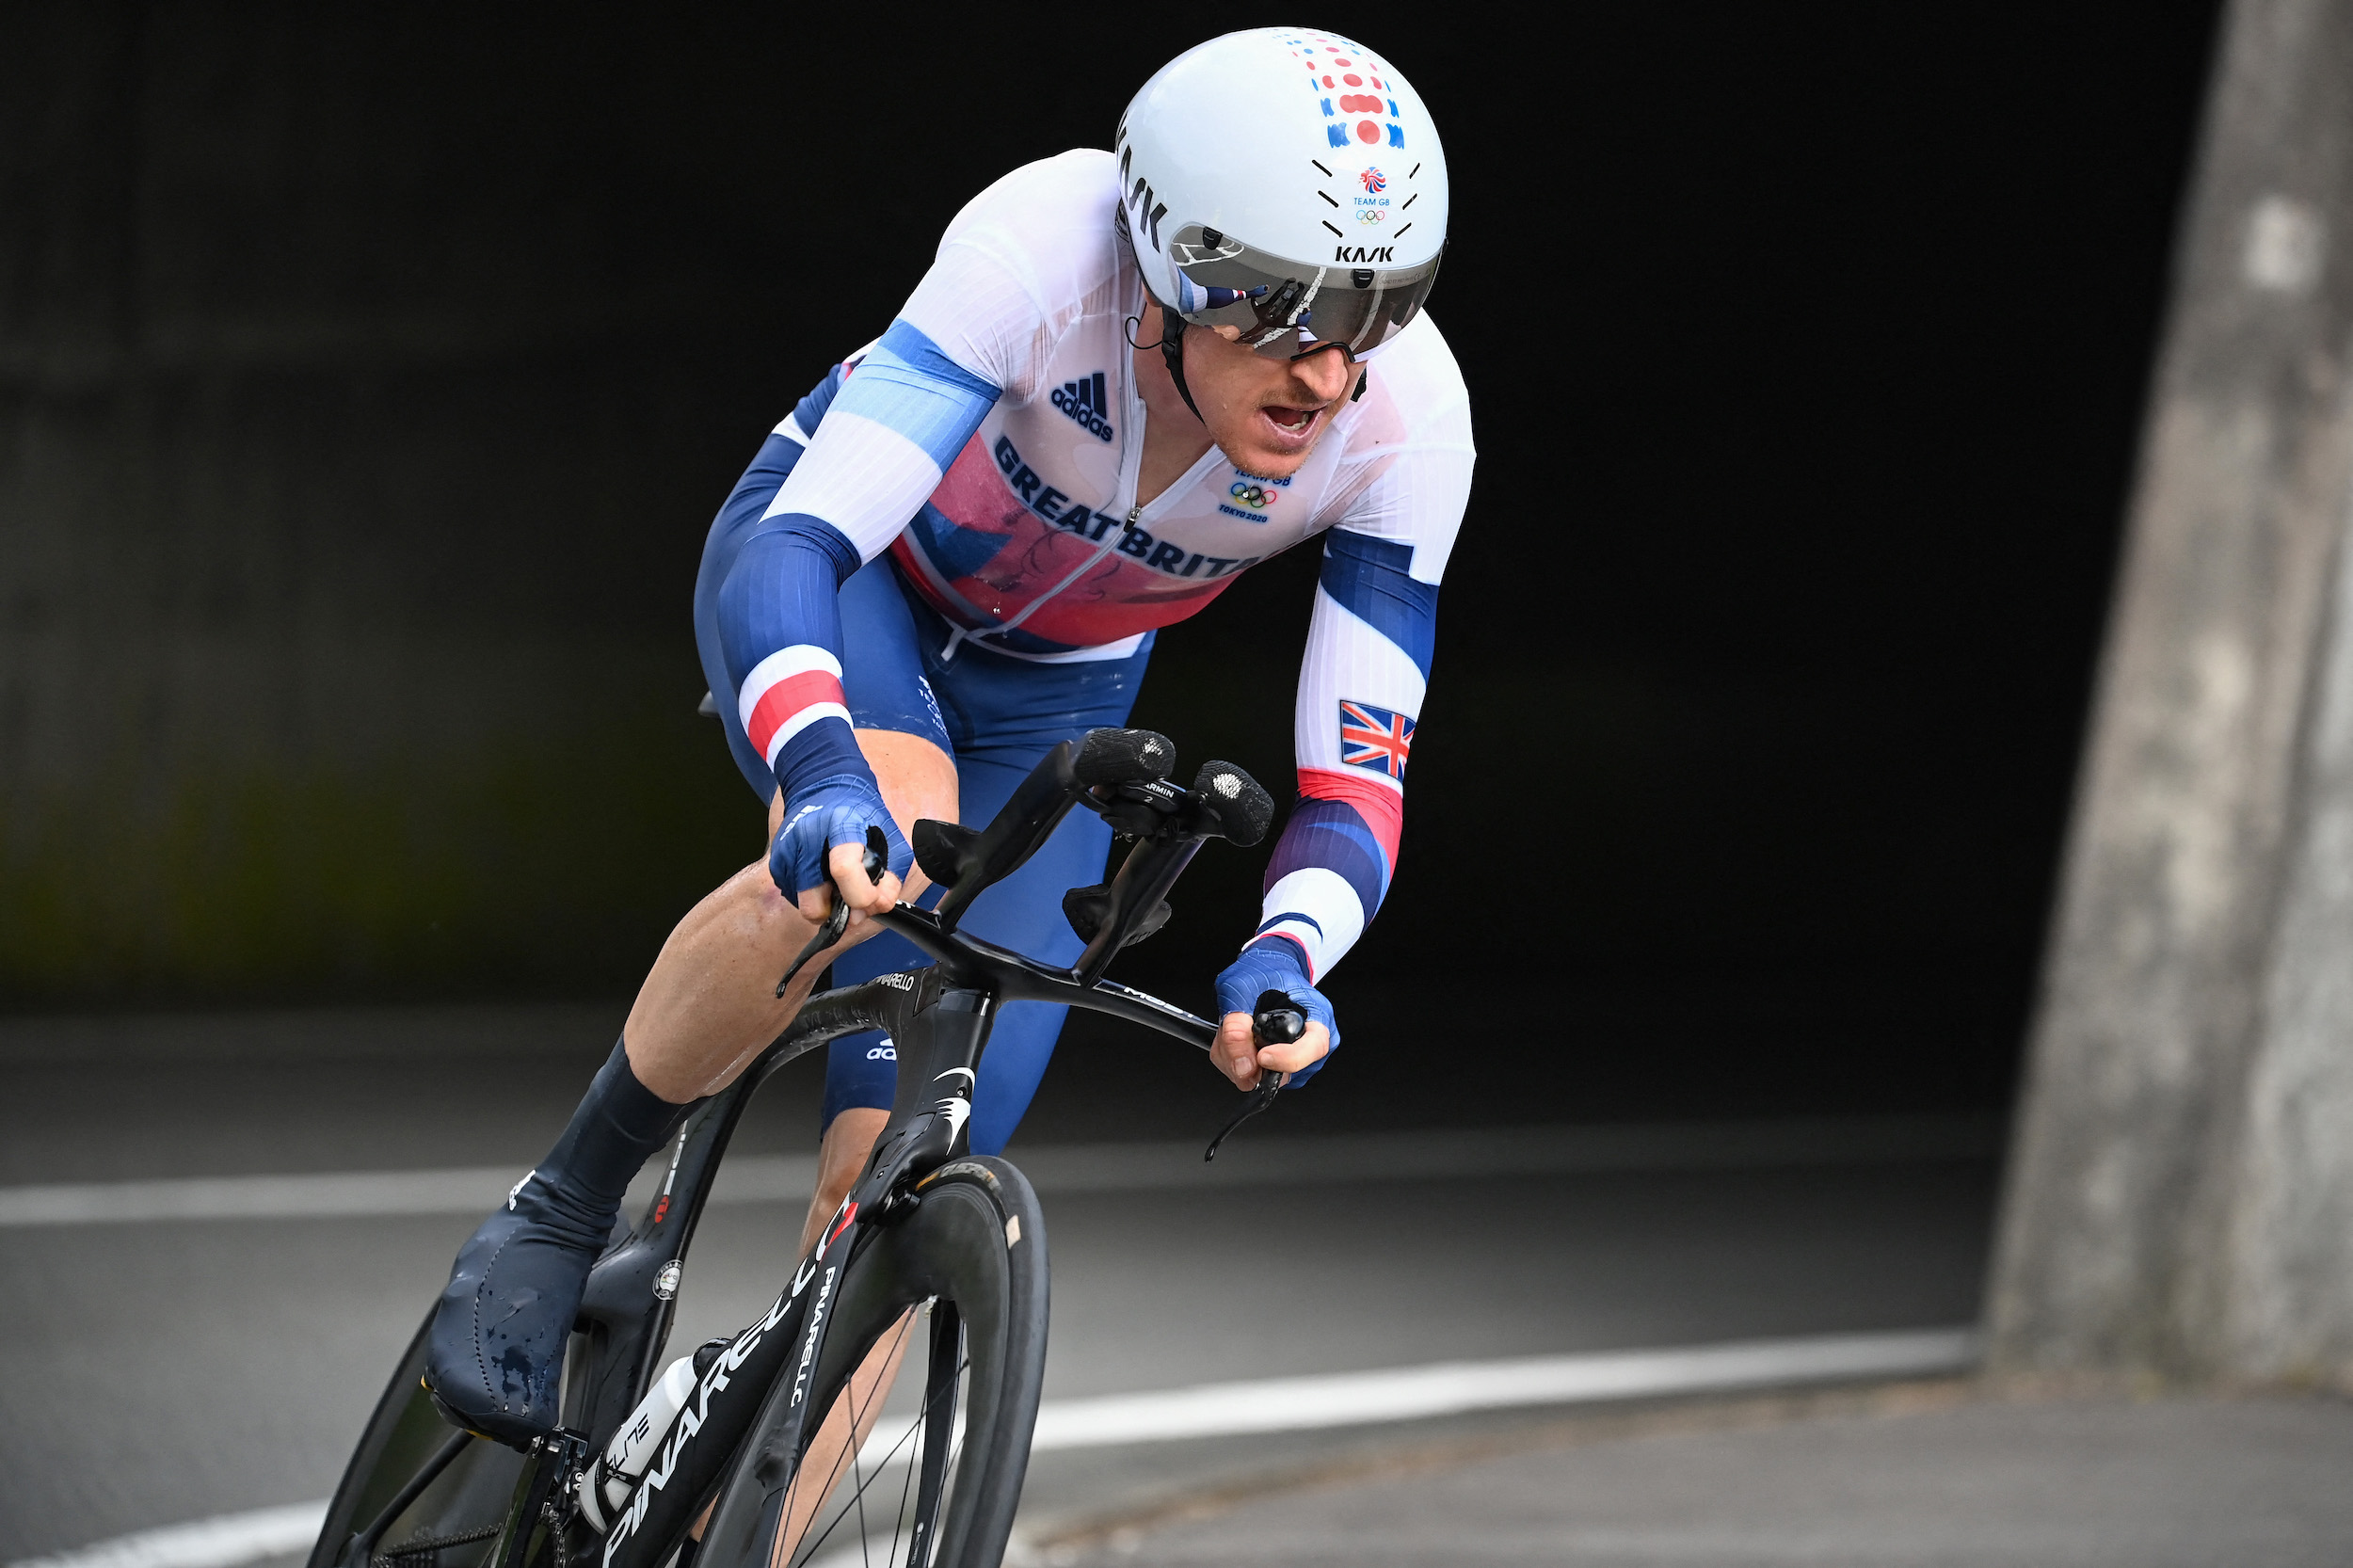 Geraint Thomas riding to 12th place in the Tokyo 2020 Olympic Games individual time trial